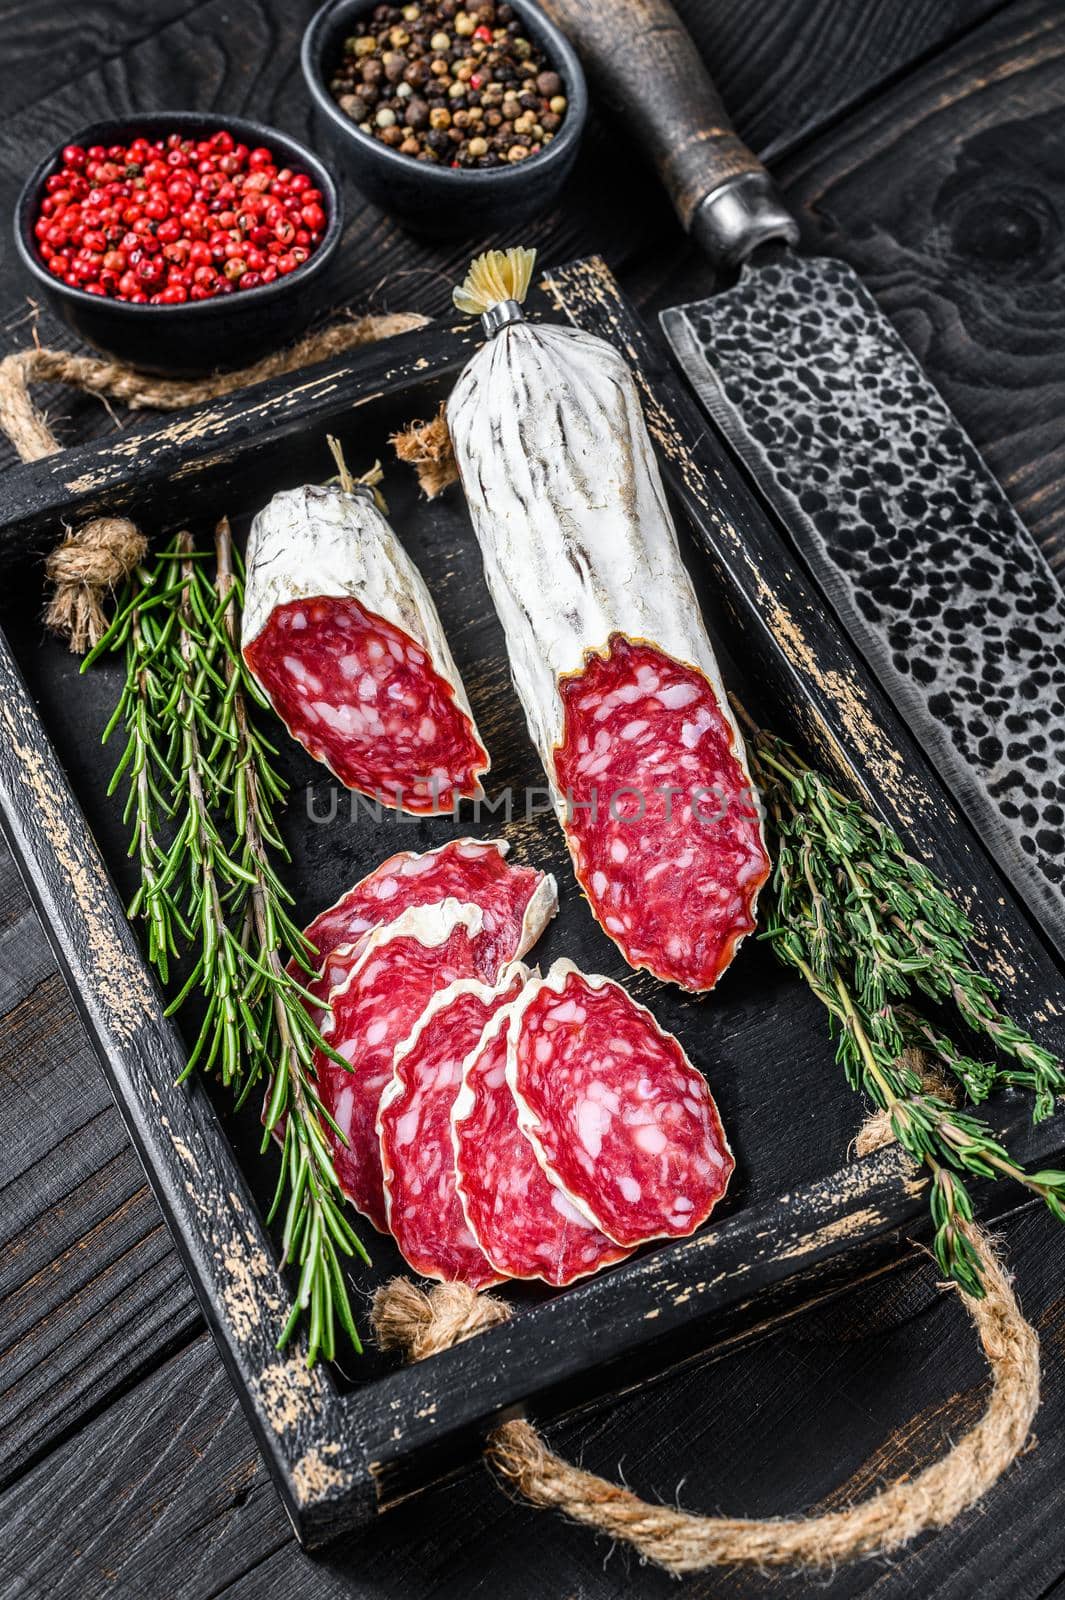 Slices of dry cured salchichon salami in a wooden tray. Black wooden background. Top view.